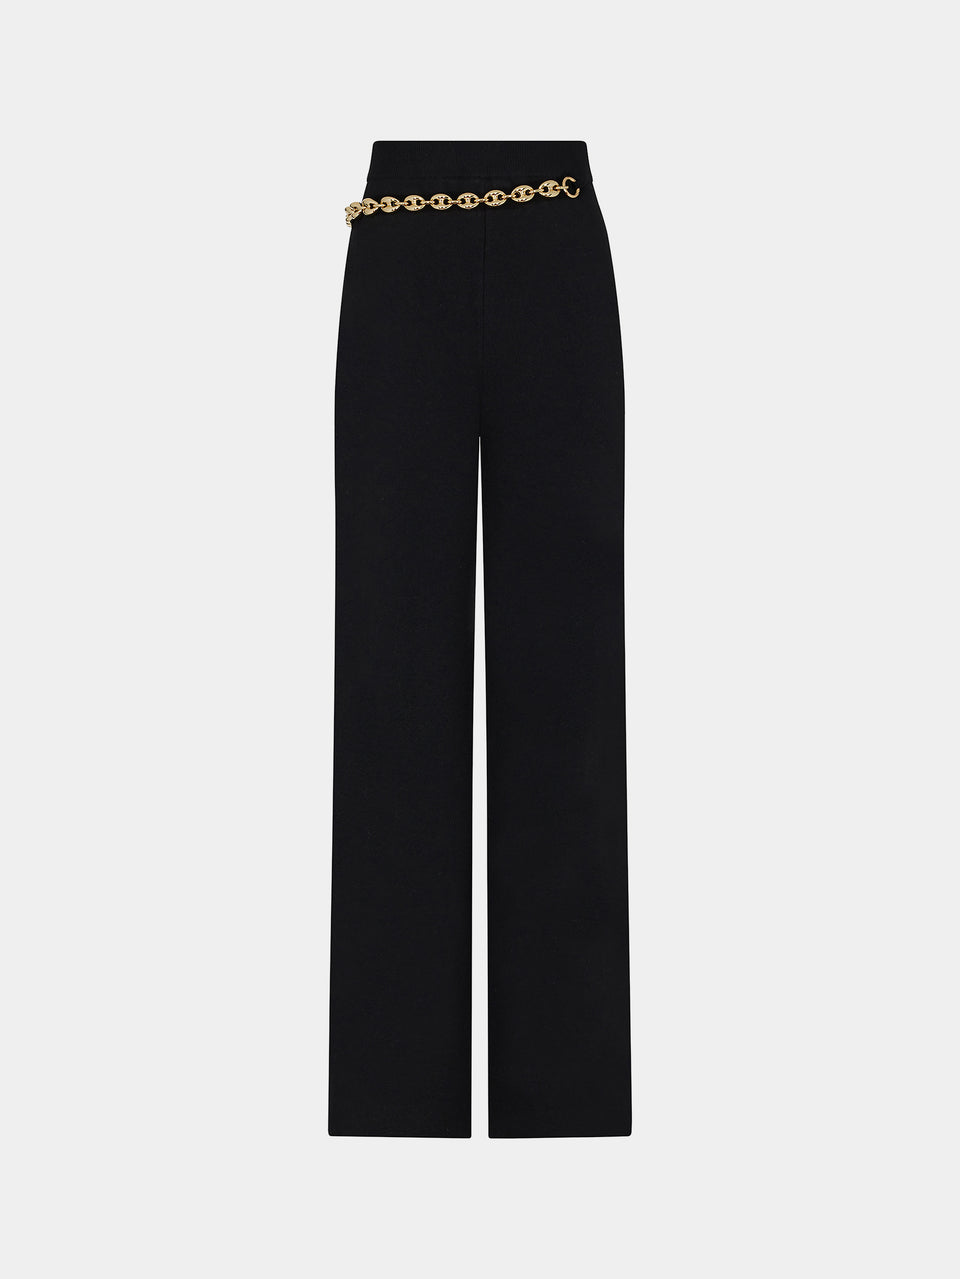 Black trousers with eight gold links chain